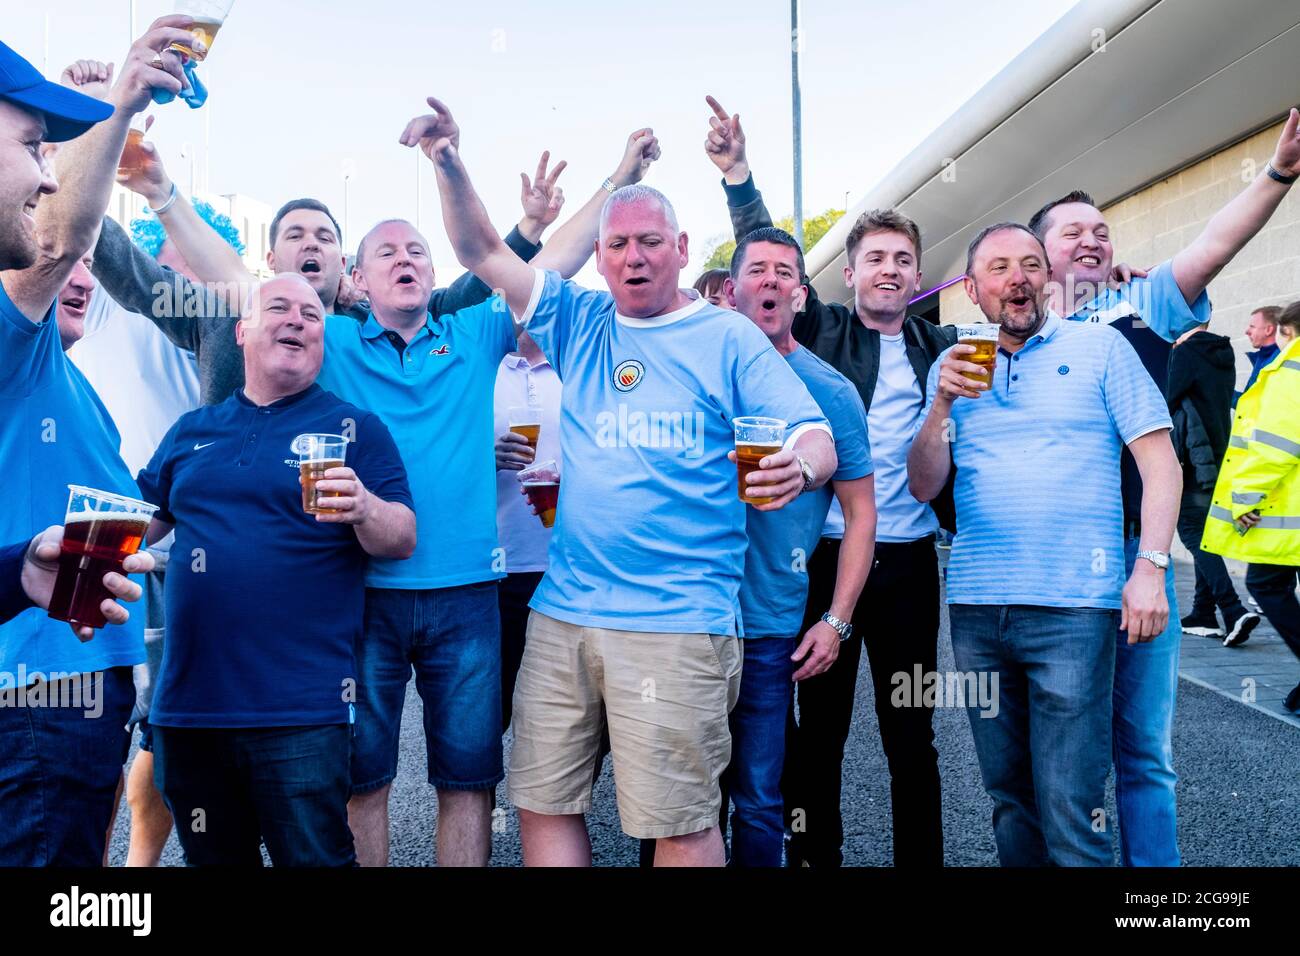 Manchester City Football Fans Celebrate Winning The Premier League Title In The Final Match of The 2018-2019 Season At The Amex Stadium, Brighton,UK Stock Photo